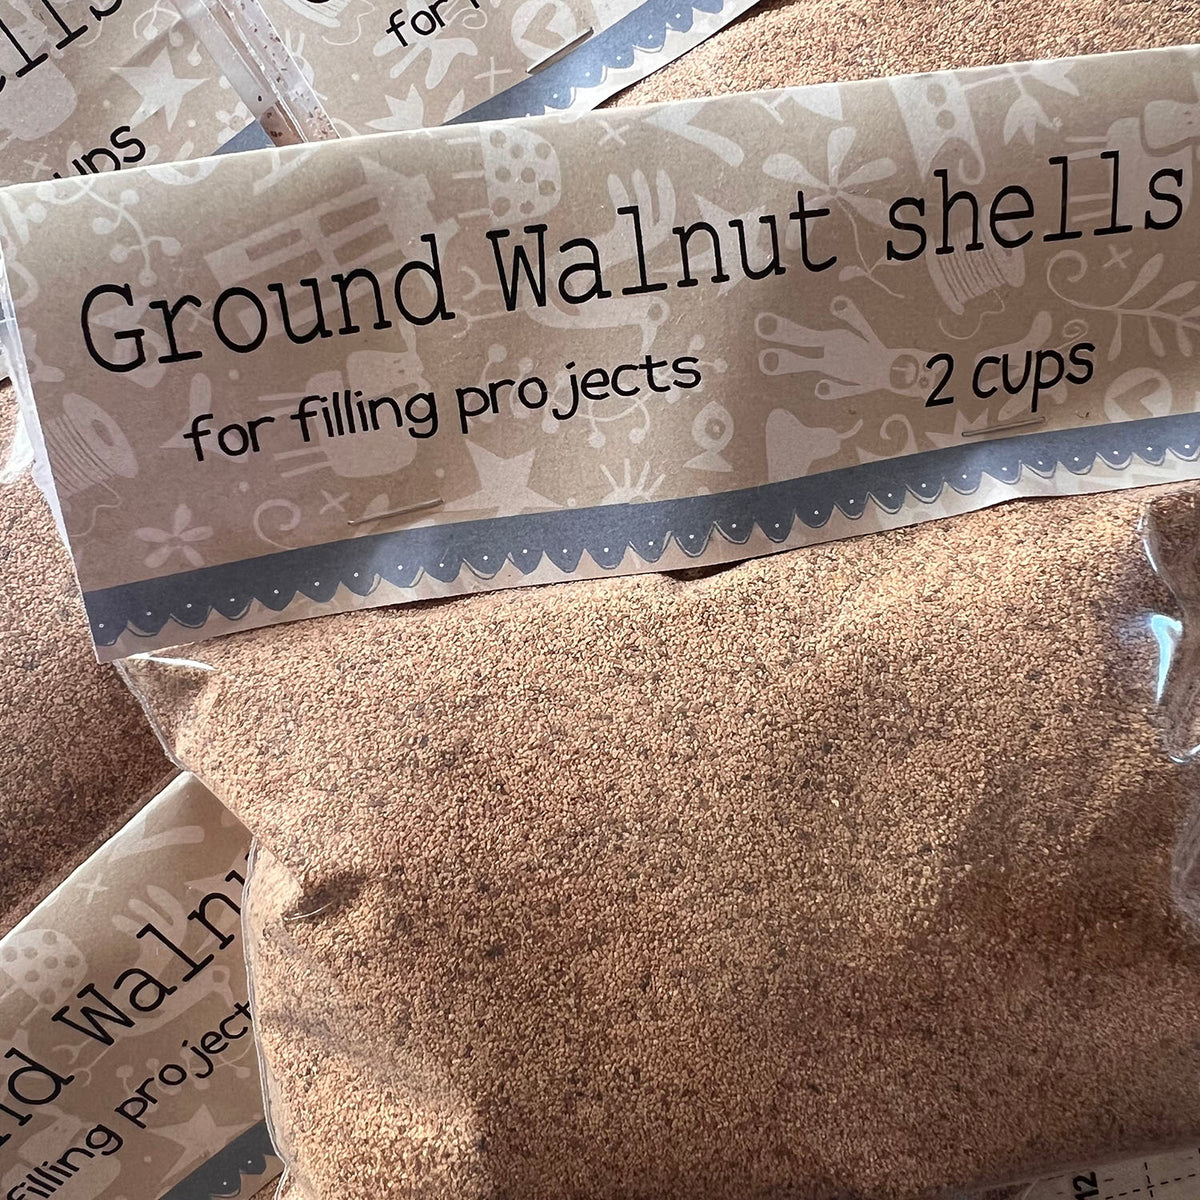 Crushed Walnut Shells – Hatched and Patched